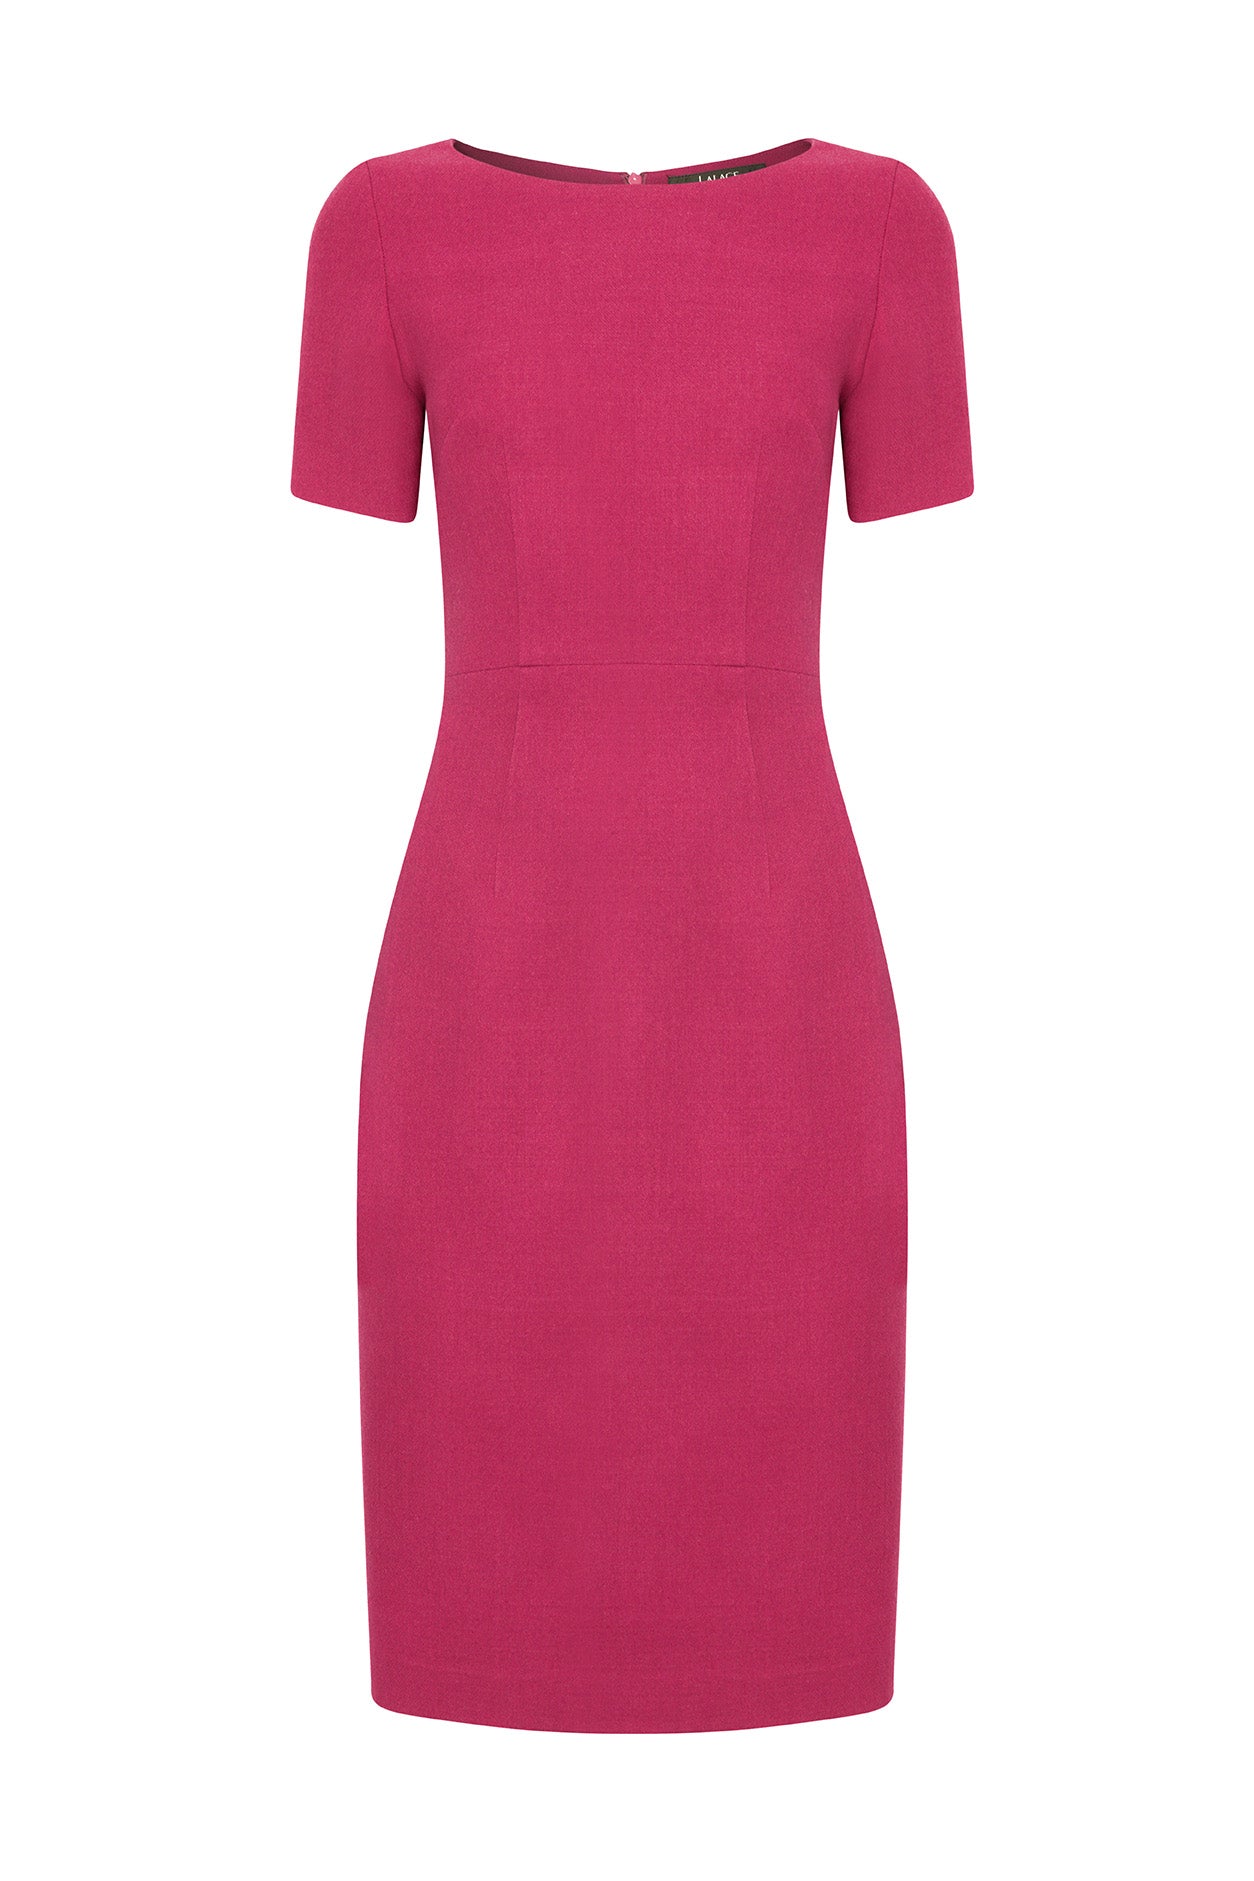 Berry Pink Dress with Boat Neck and Short Sleeves - Angie